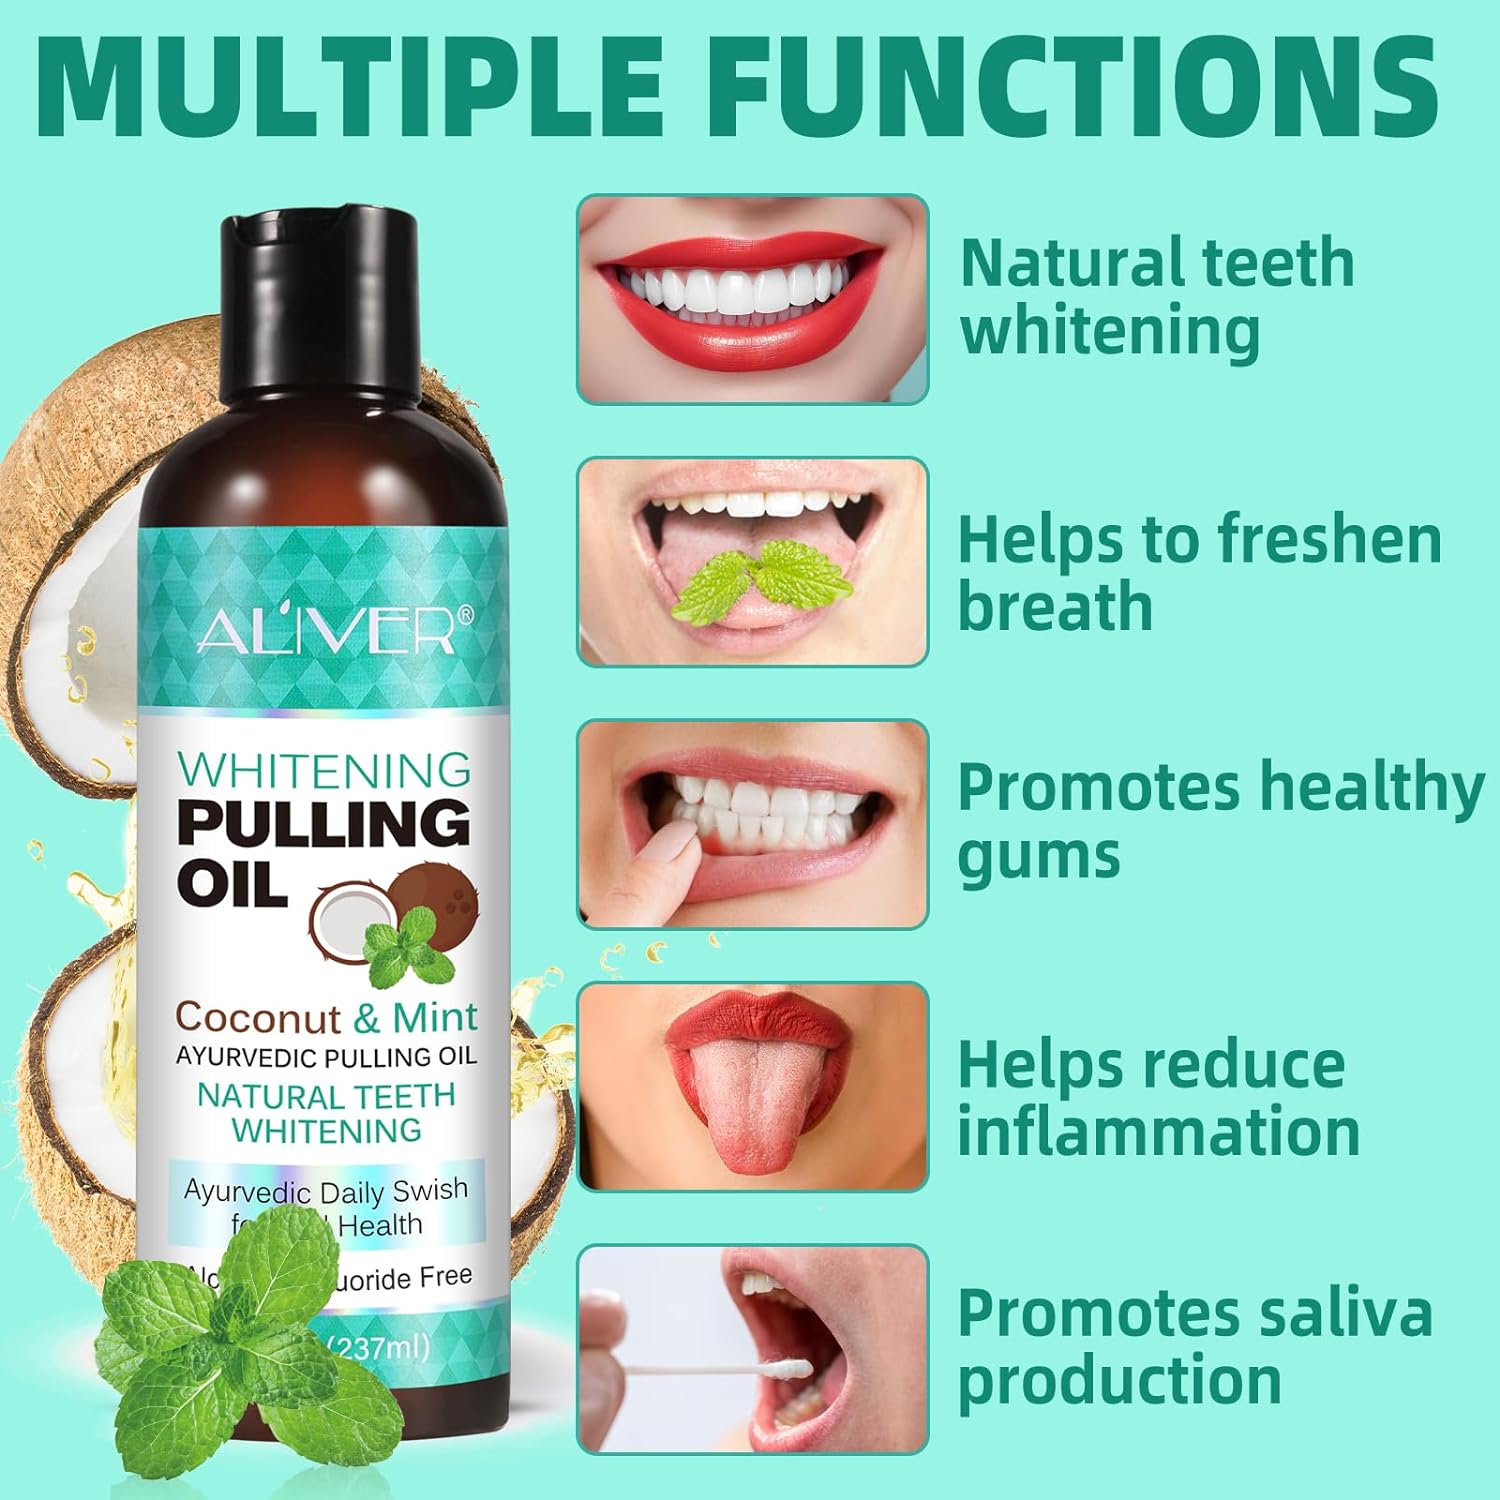 Pulling Oil 8 Fl.Oz , Mint Oil Pulling Mouthwash with Tongue Scraper Alcohol Free Natural Coconut Oil Pulling